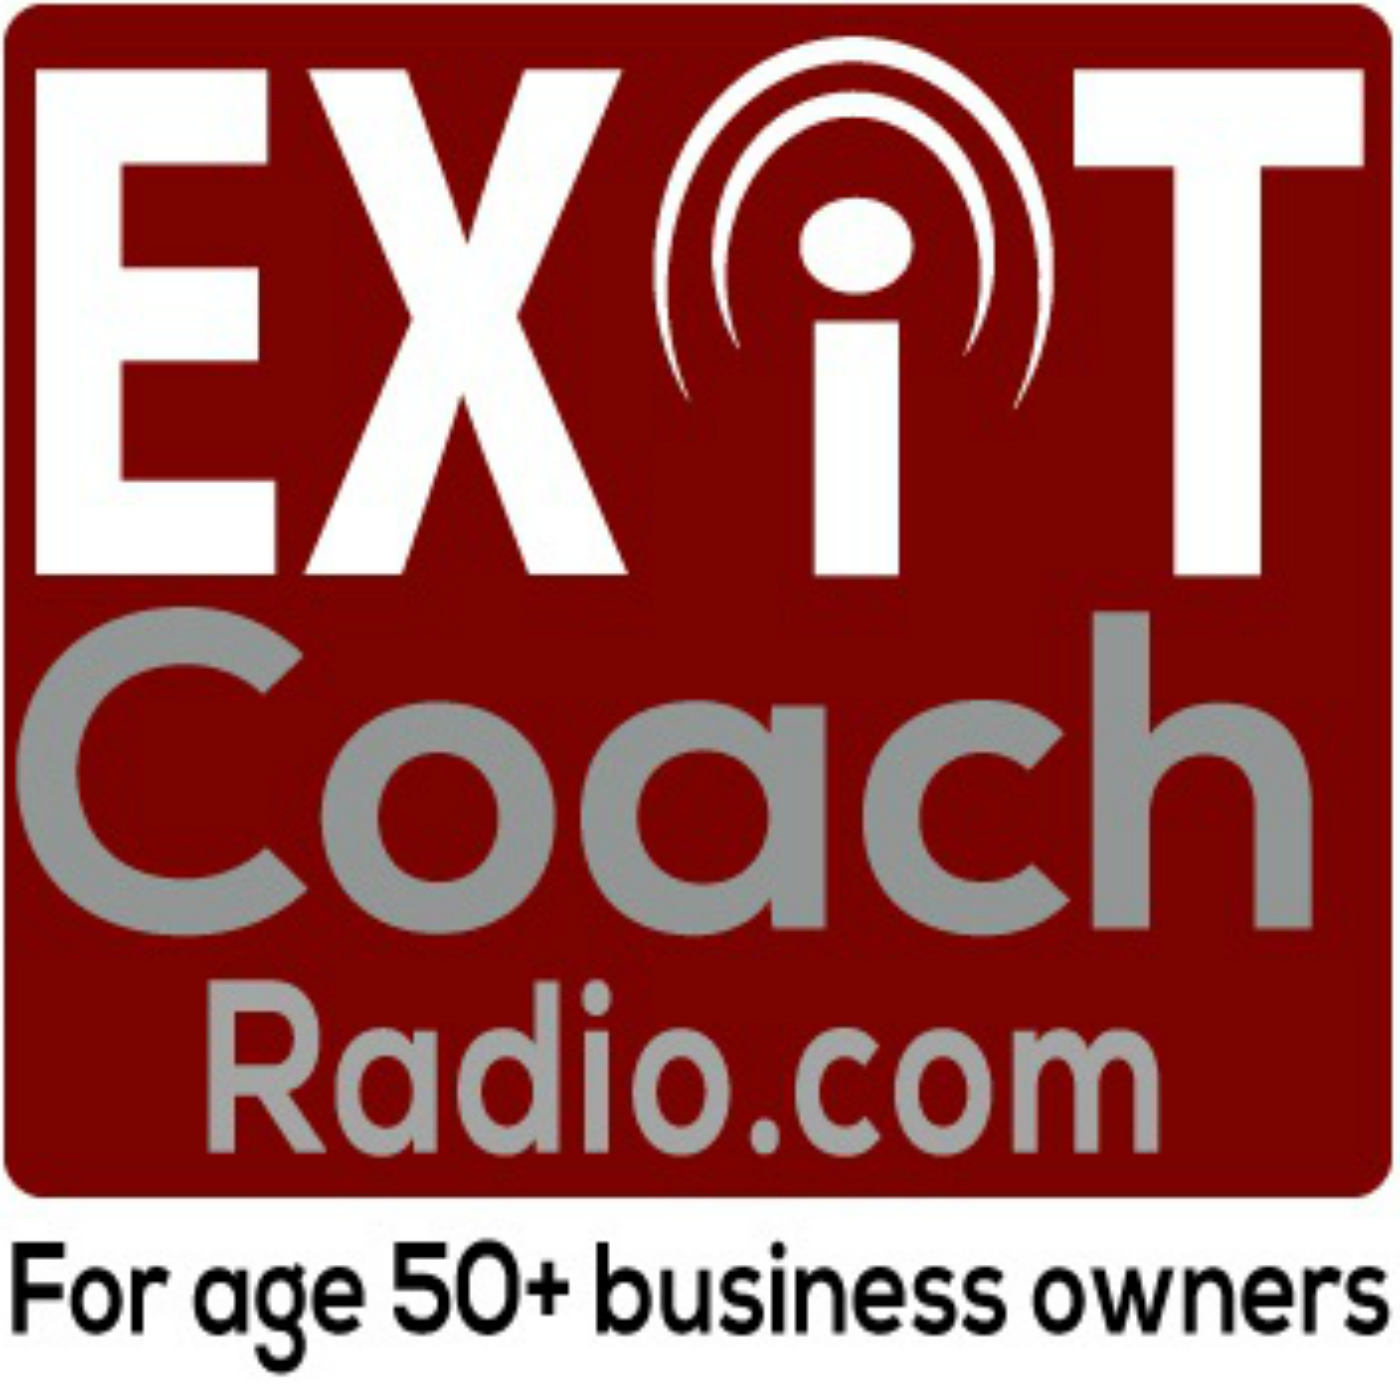 Exit Coach 20M Interview: Marketing to Boomers and Seniors Online - David Weigelt